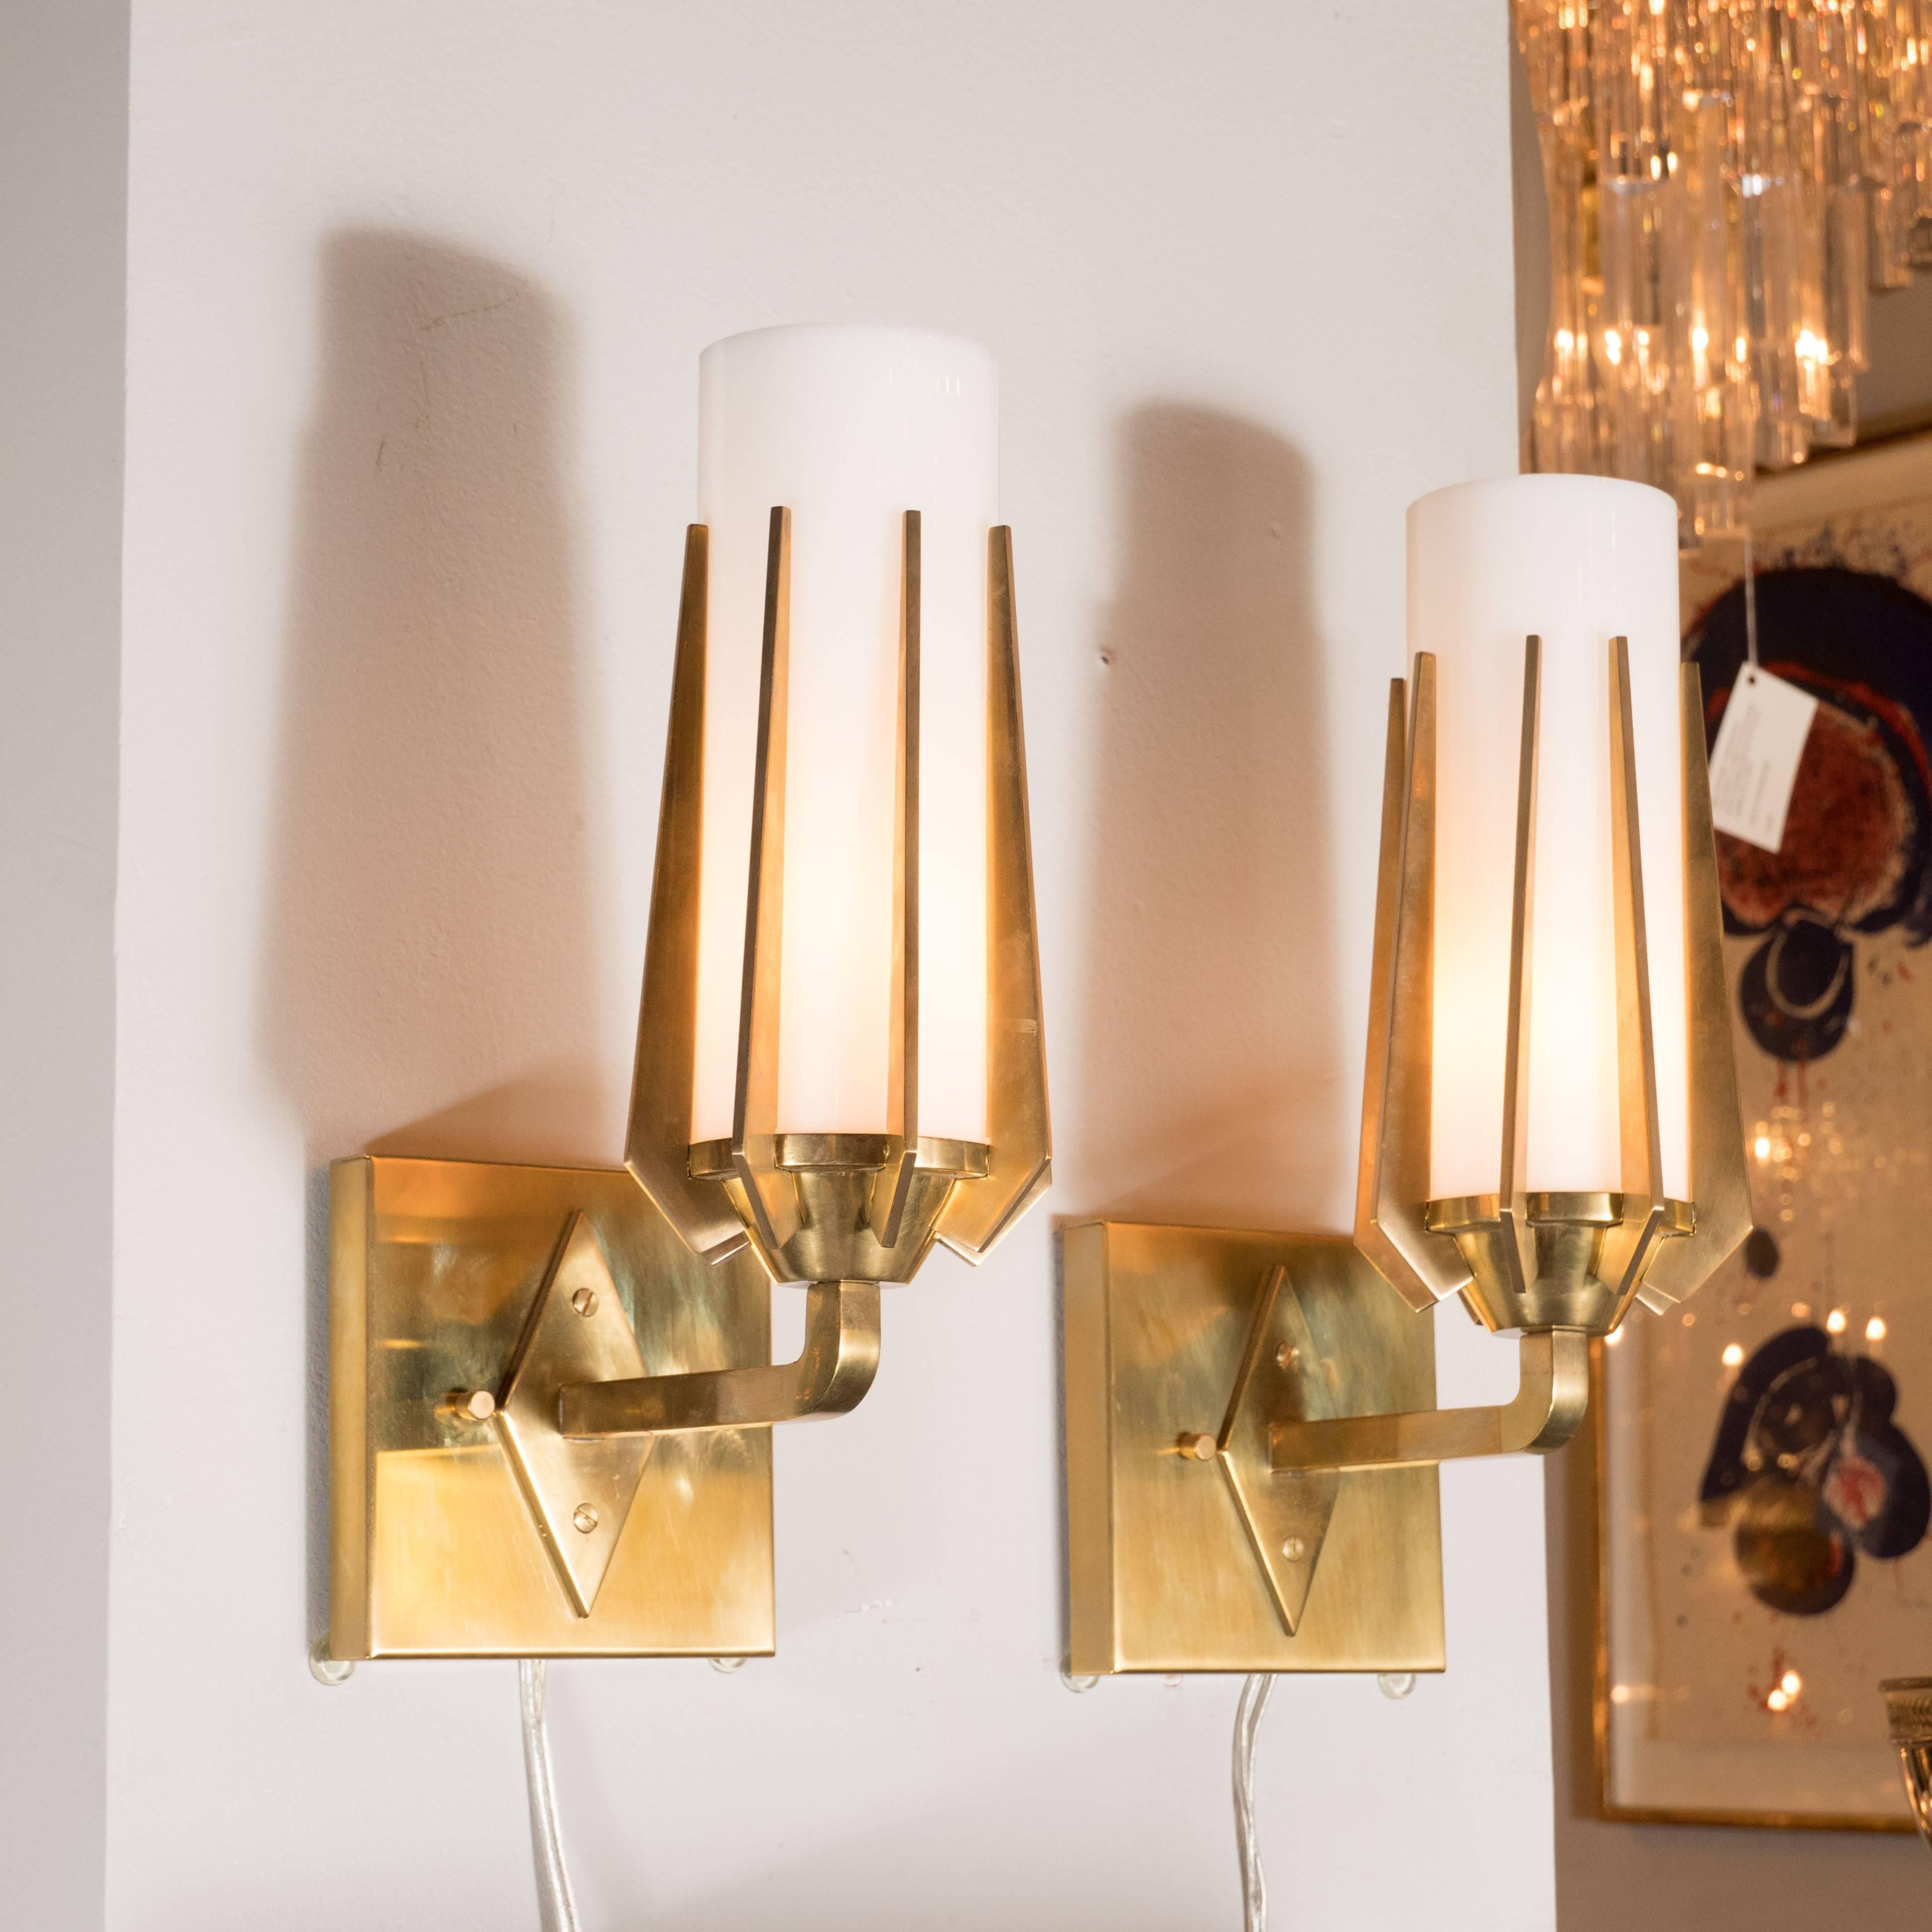 Italian Pair of Midcentury Sconces in Brass and White Glass in the Manner of Gio Ponti